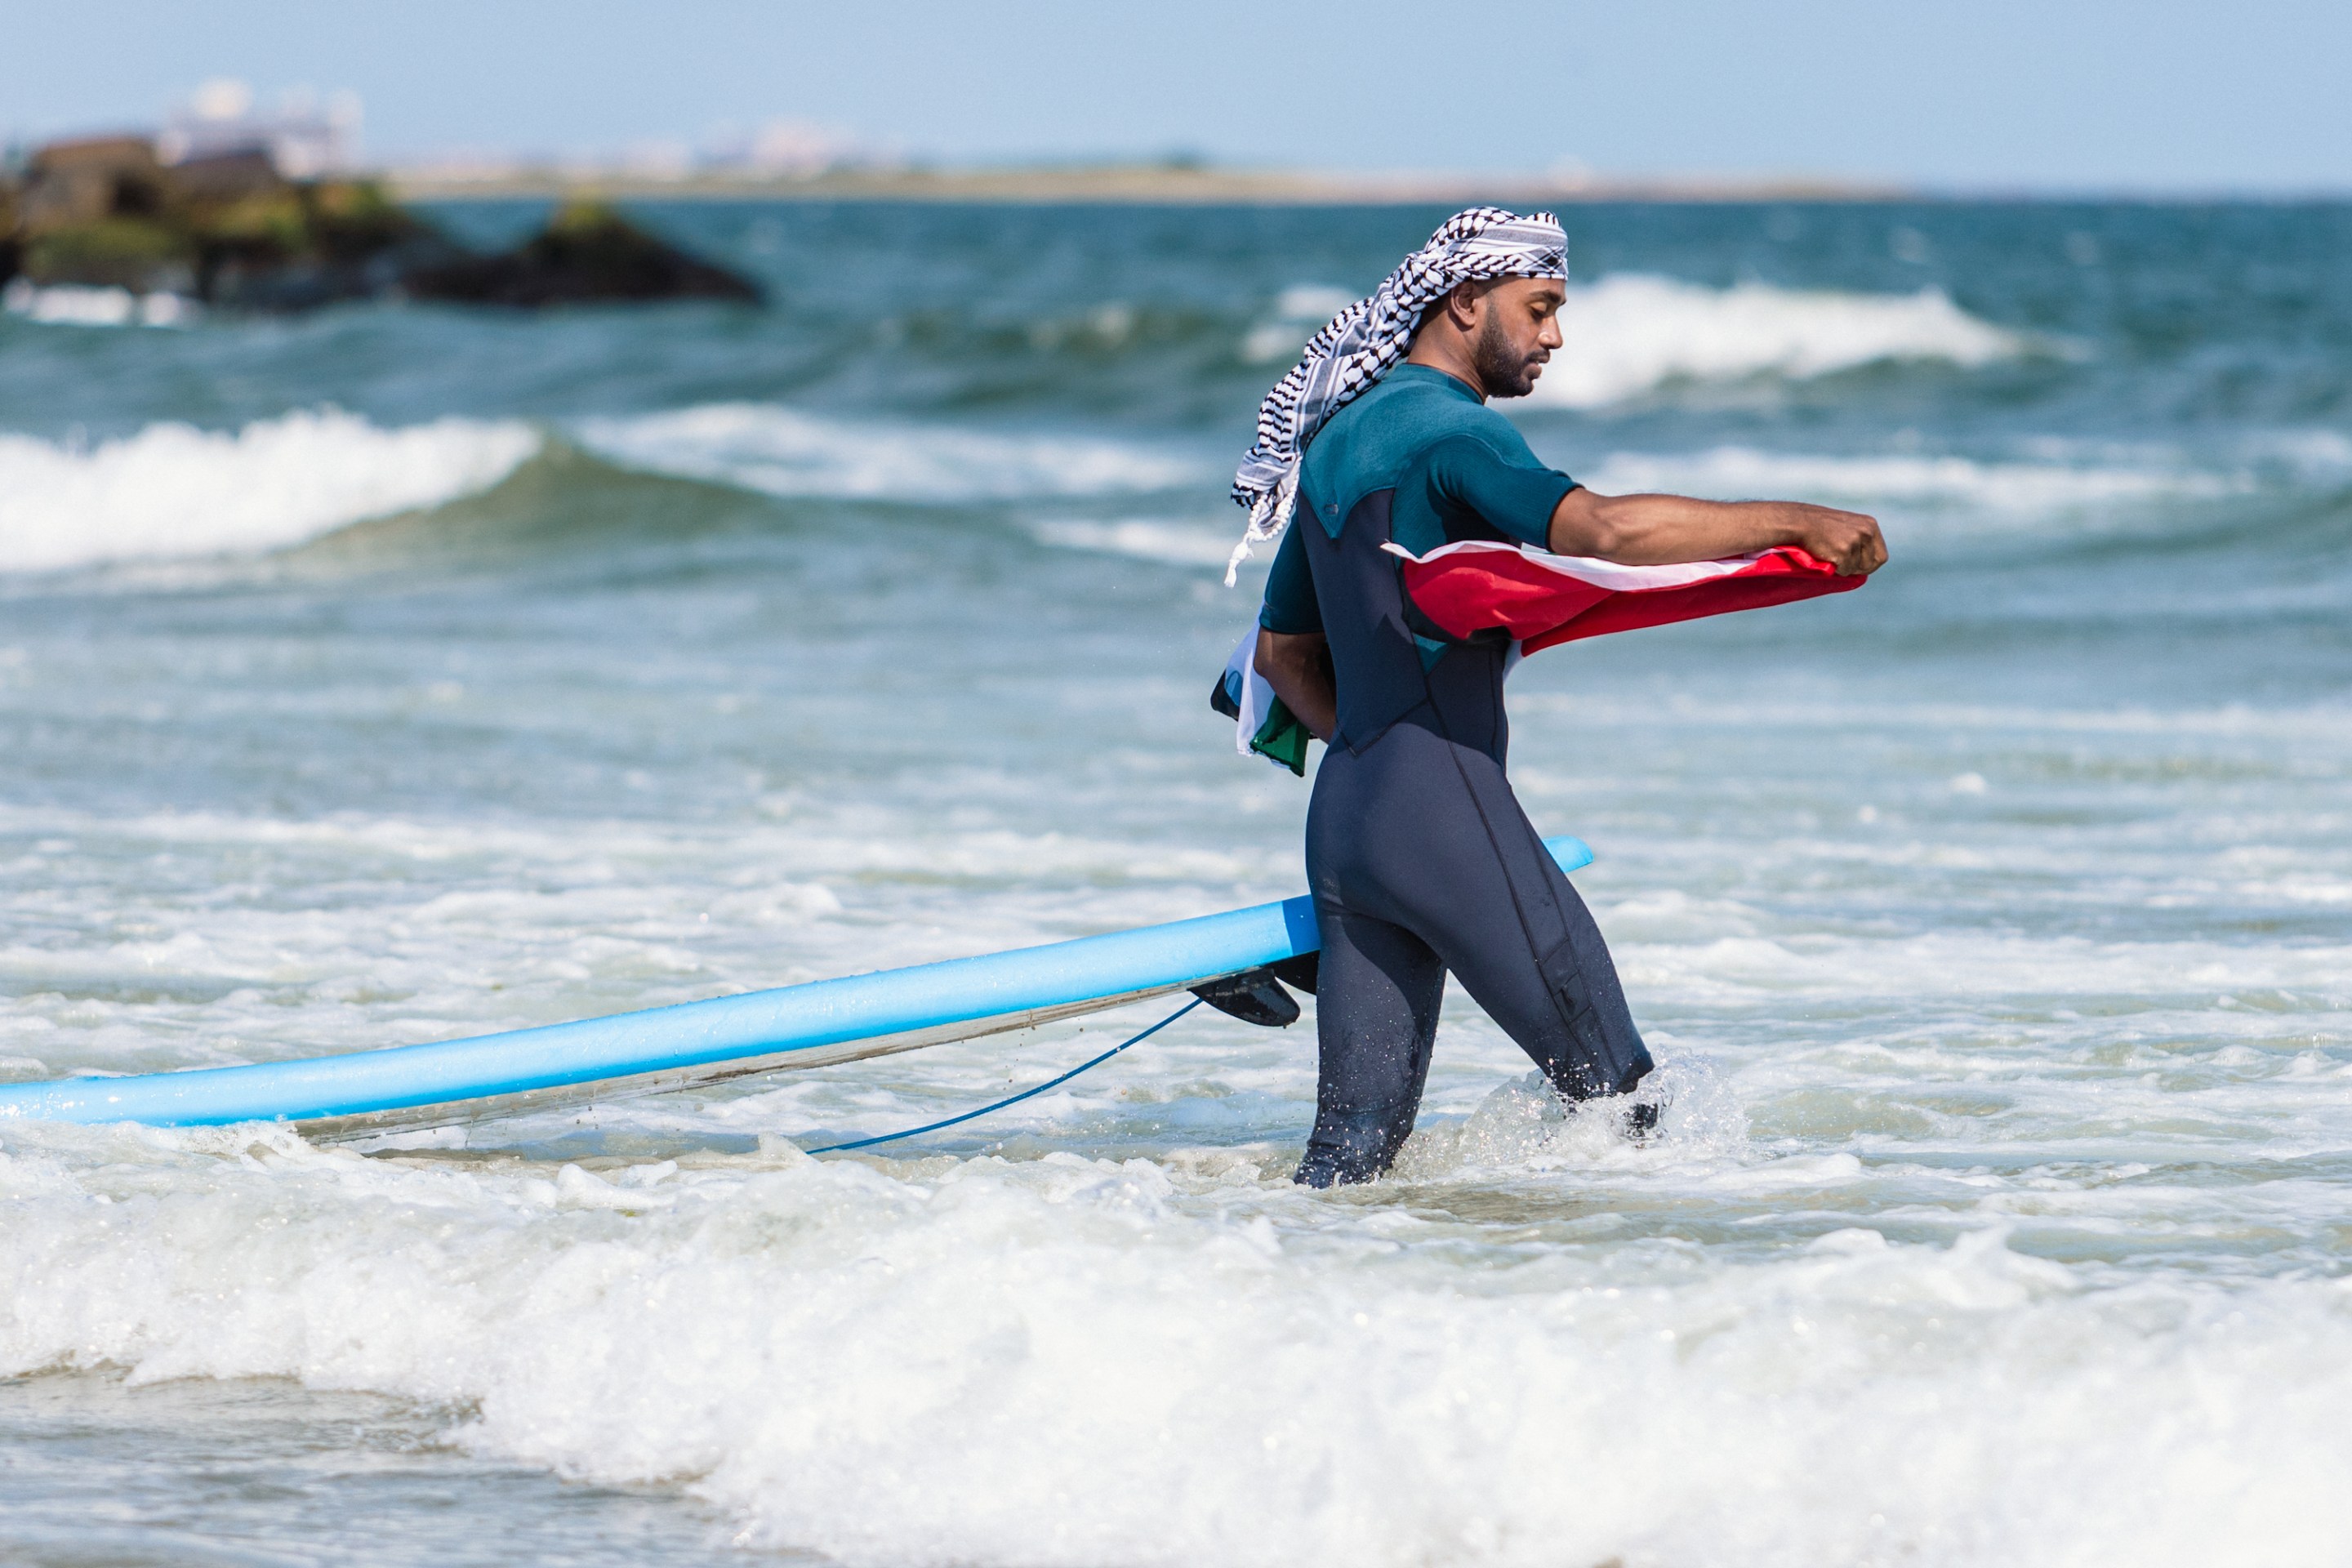 A surfer in a blue wetsuit carries a light blue surfboard with him as he walks into the ocean. He is holding a Palestinian flag in his right hand and wearing a keffiyeh around his head.